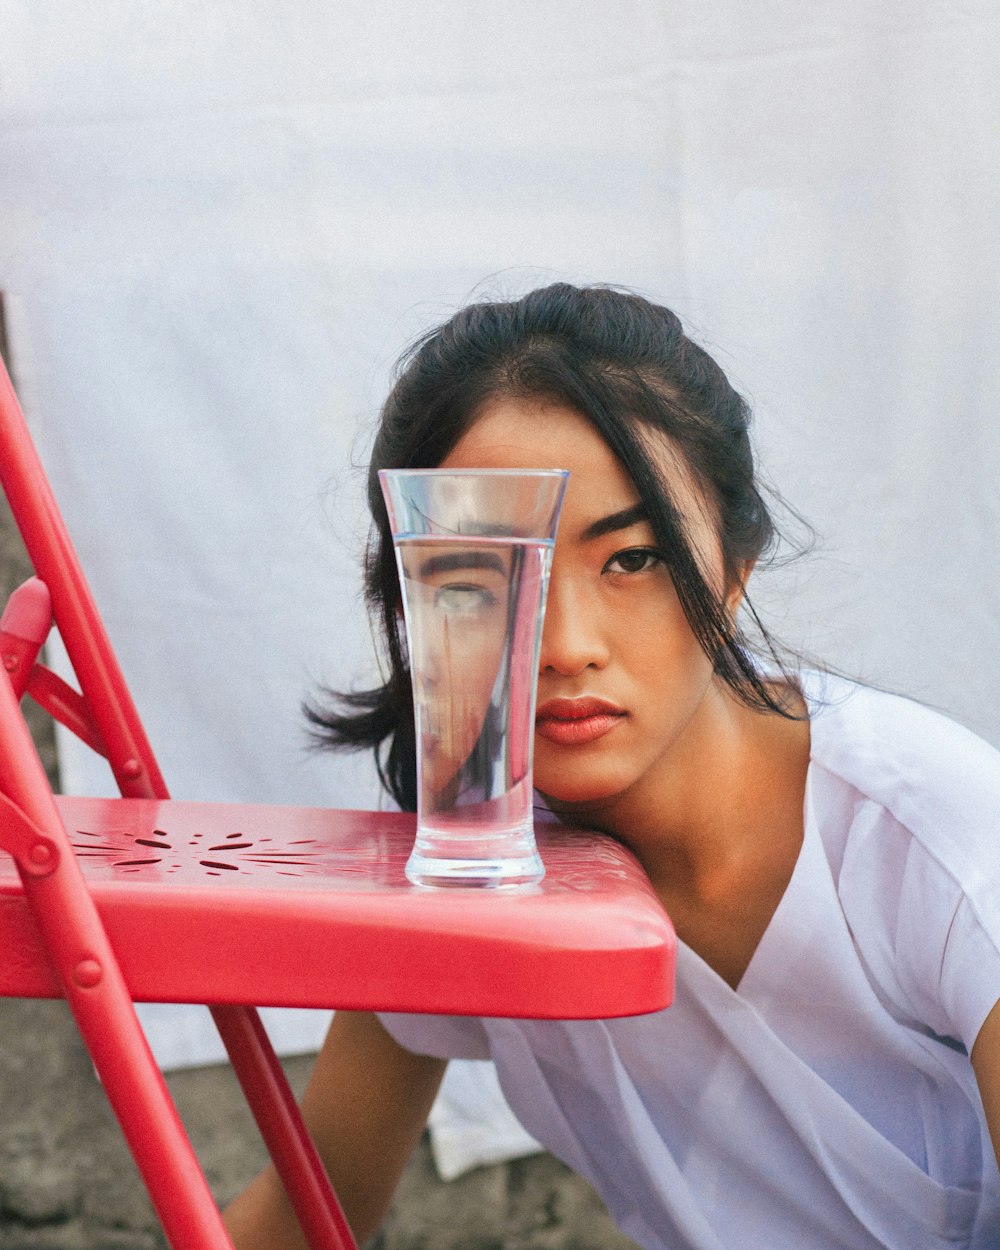 woman in white top looking through glass of water